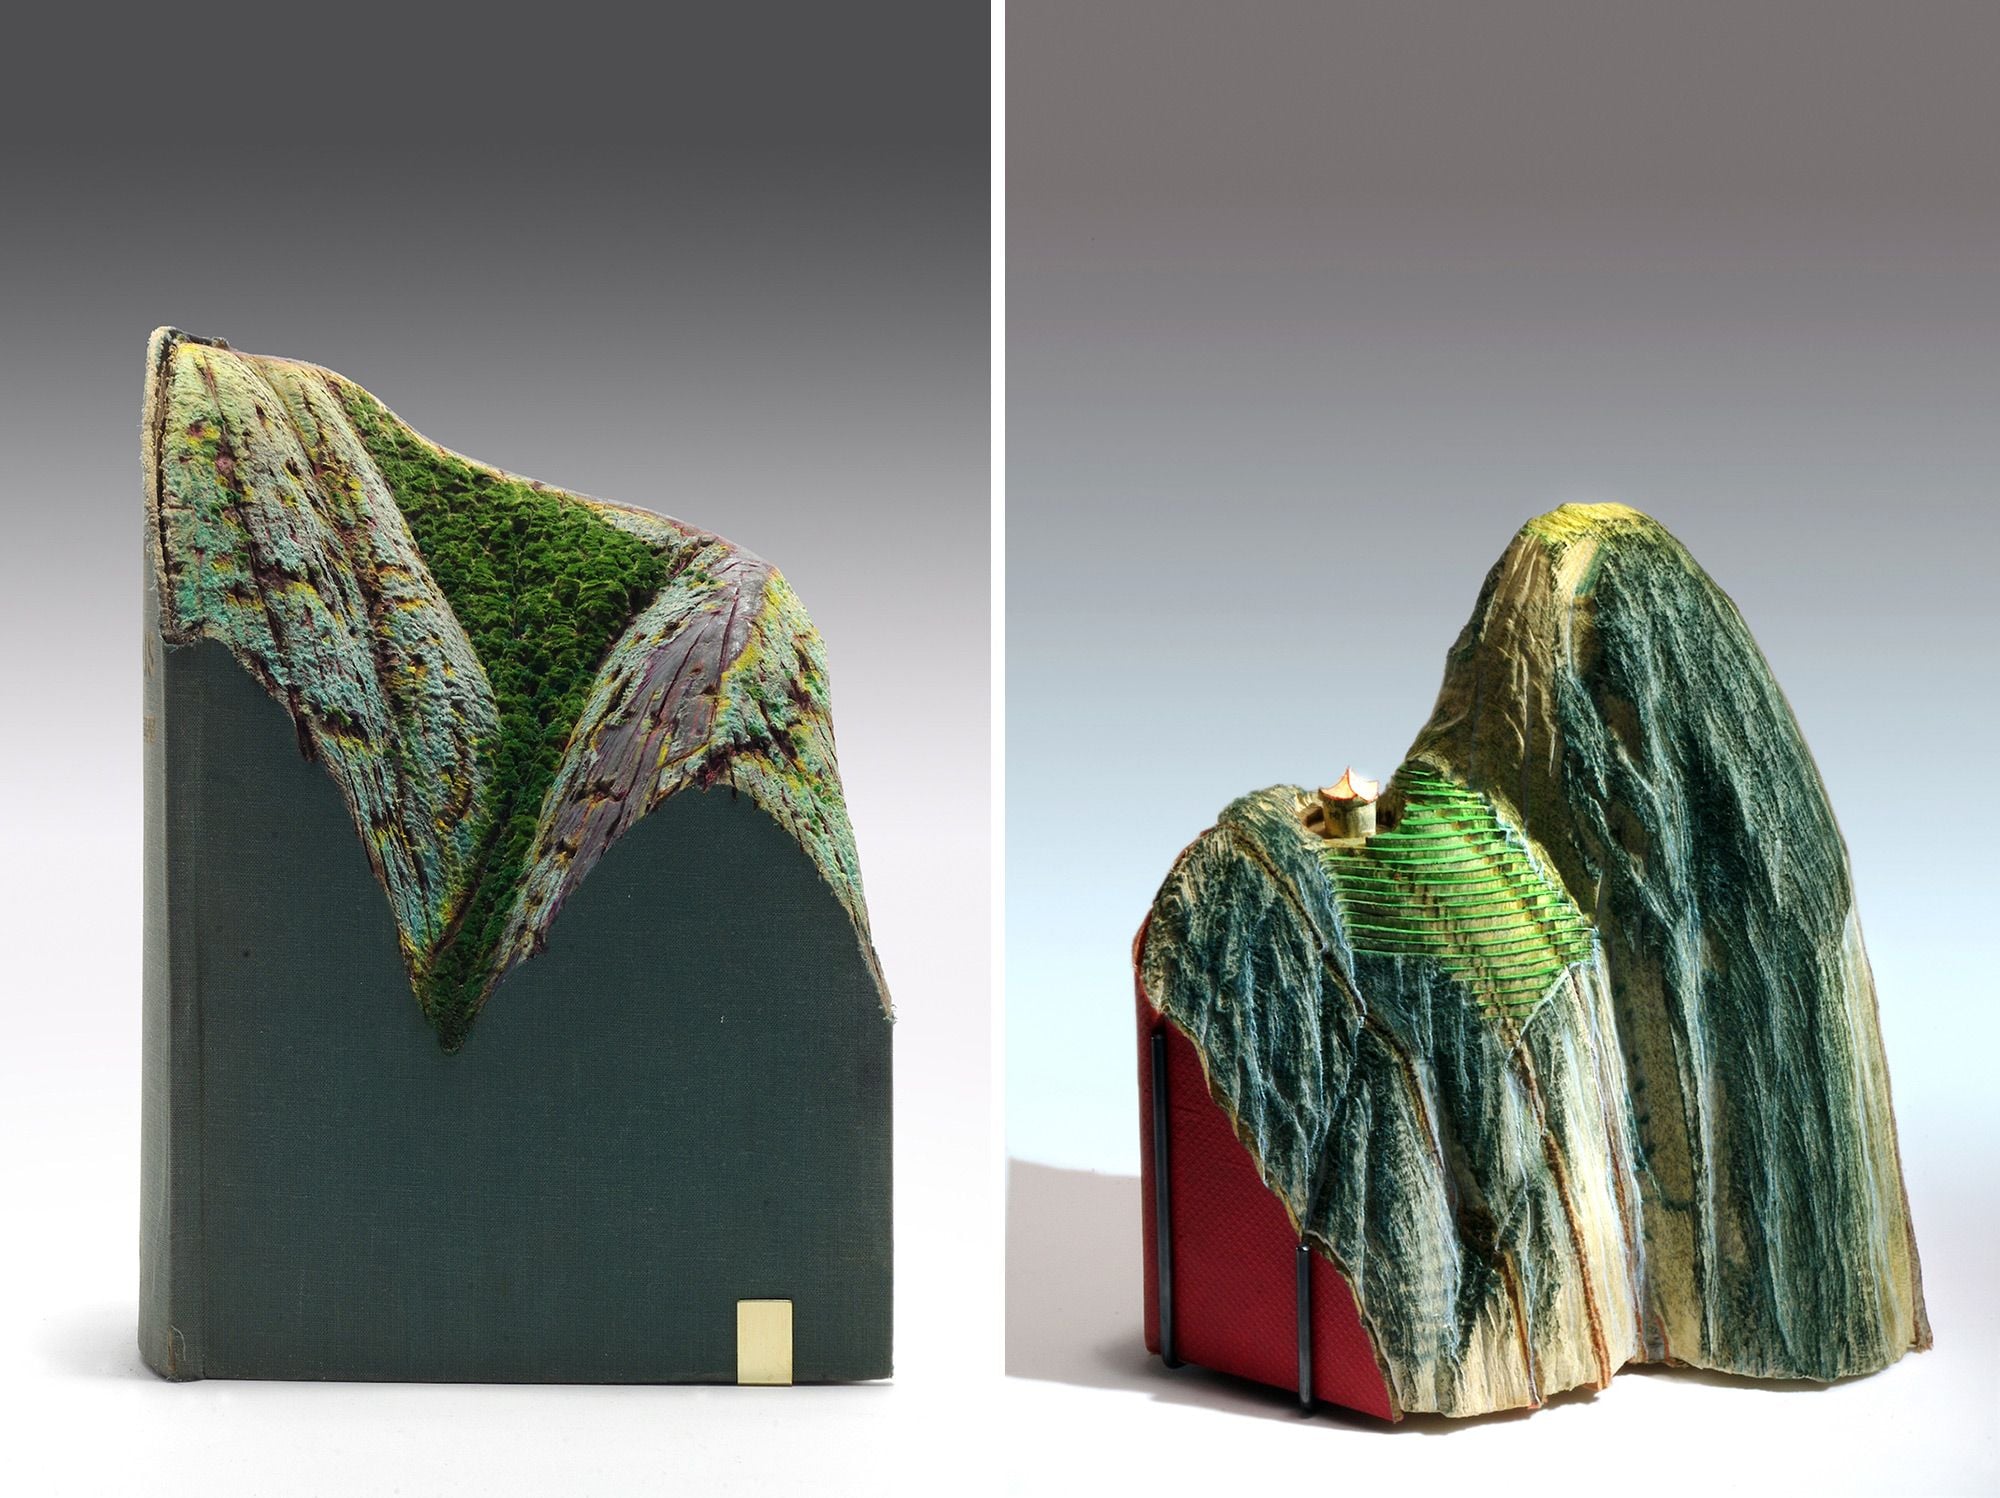 Unique book landscapes carved out by Guy Laramée for his 